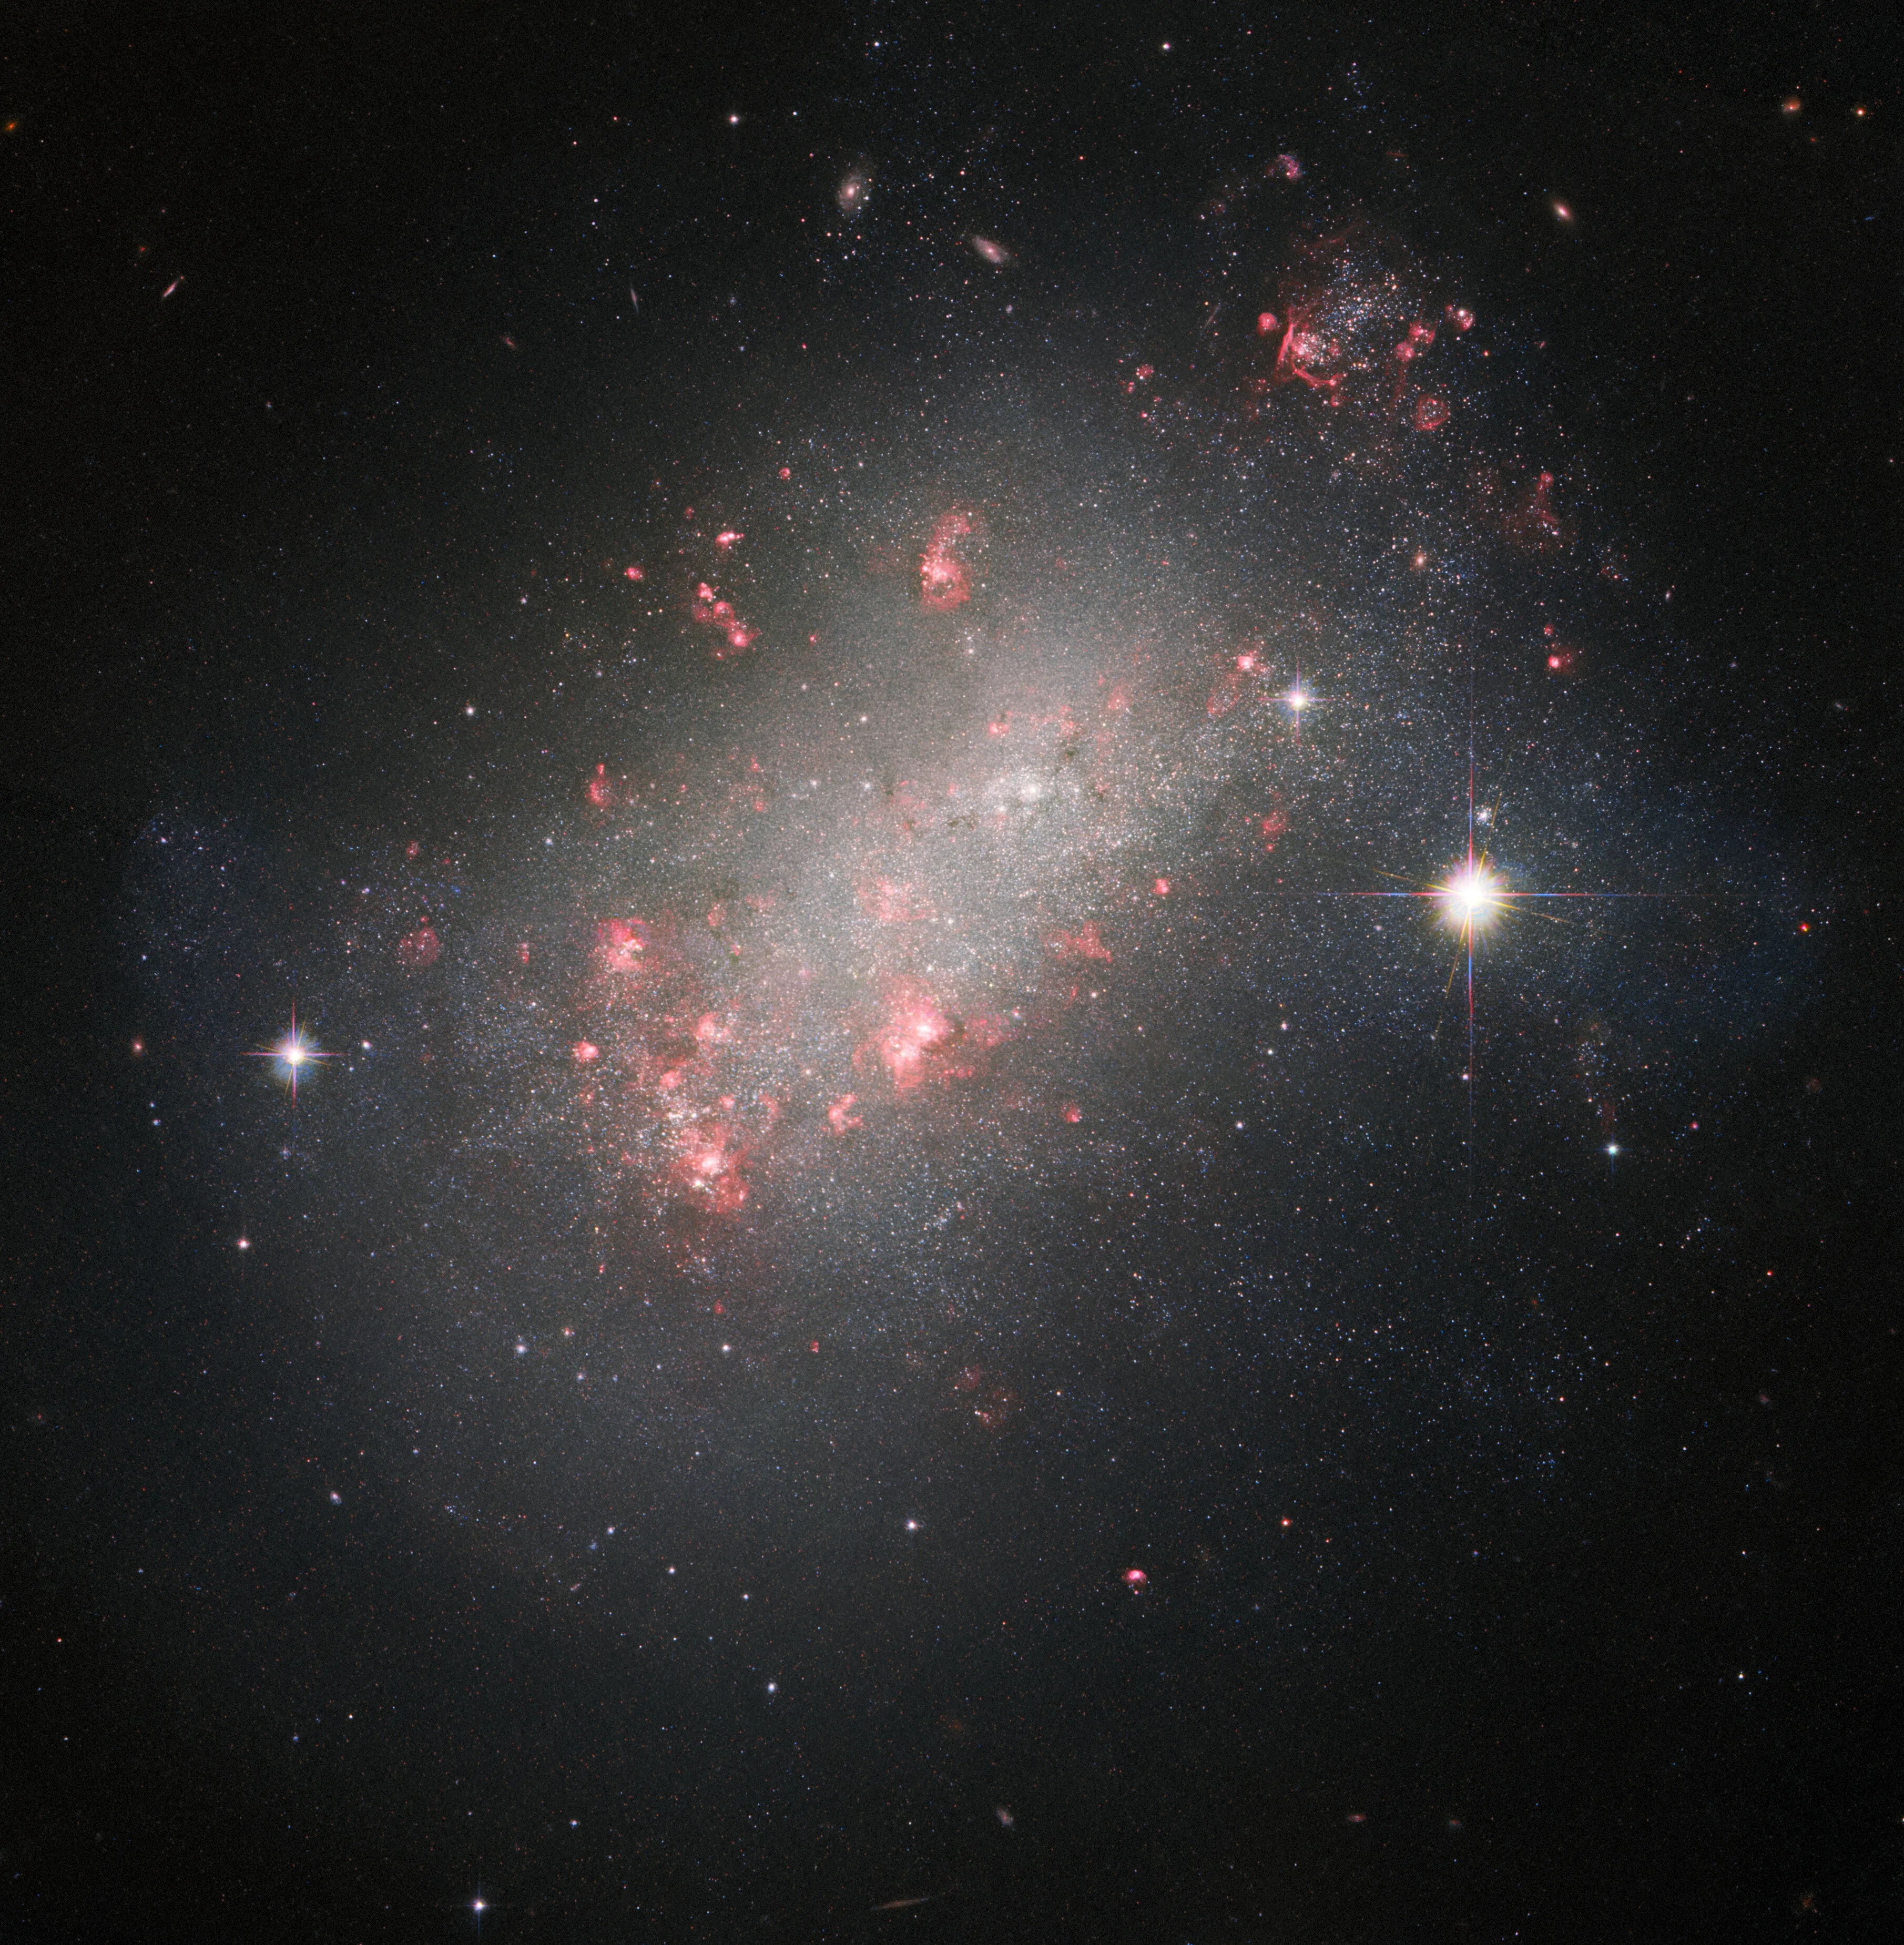 Bright, white haze of stars extending from the lower left to the upper right.
pinkish-red star-forming regions dot the galaxy